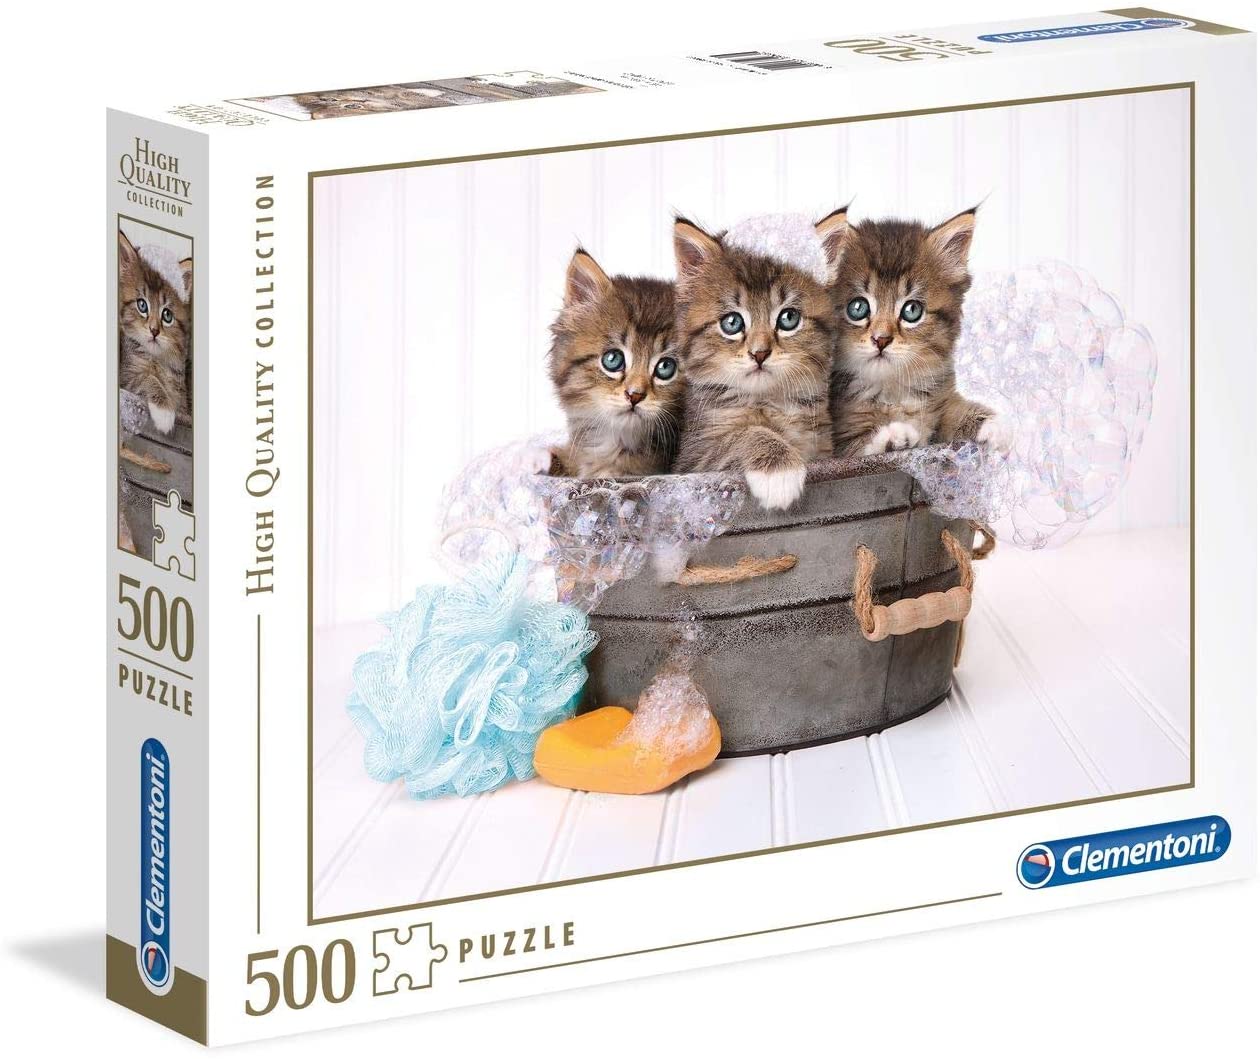 Clementoni - Kittens and Soap - 500 Piece Jigsaw Puzzle